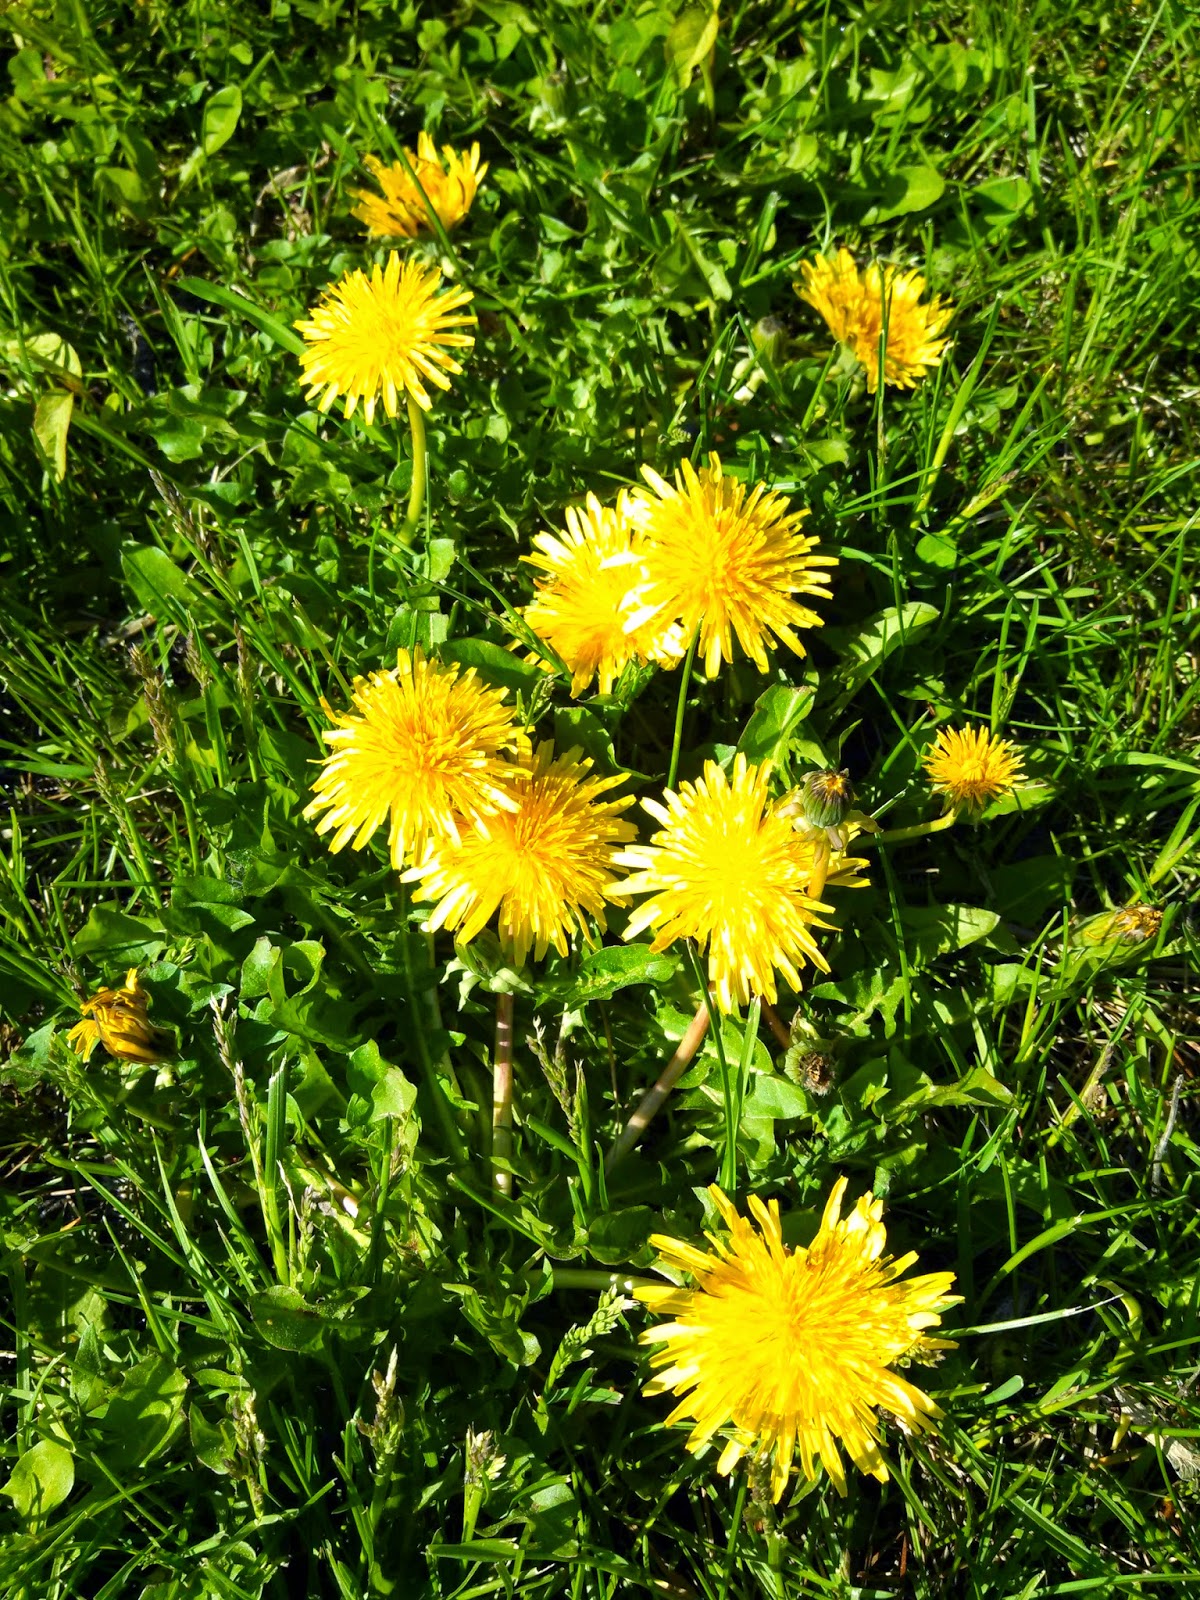 FREE DANDELIONS at Vermont State Parks!